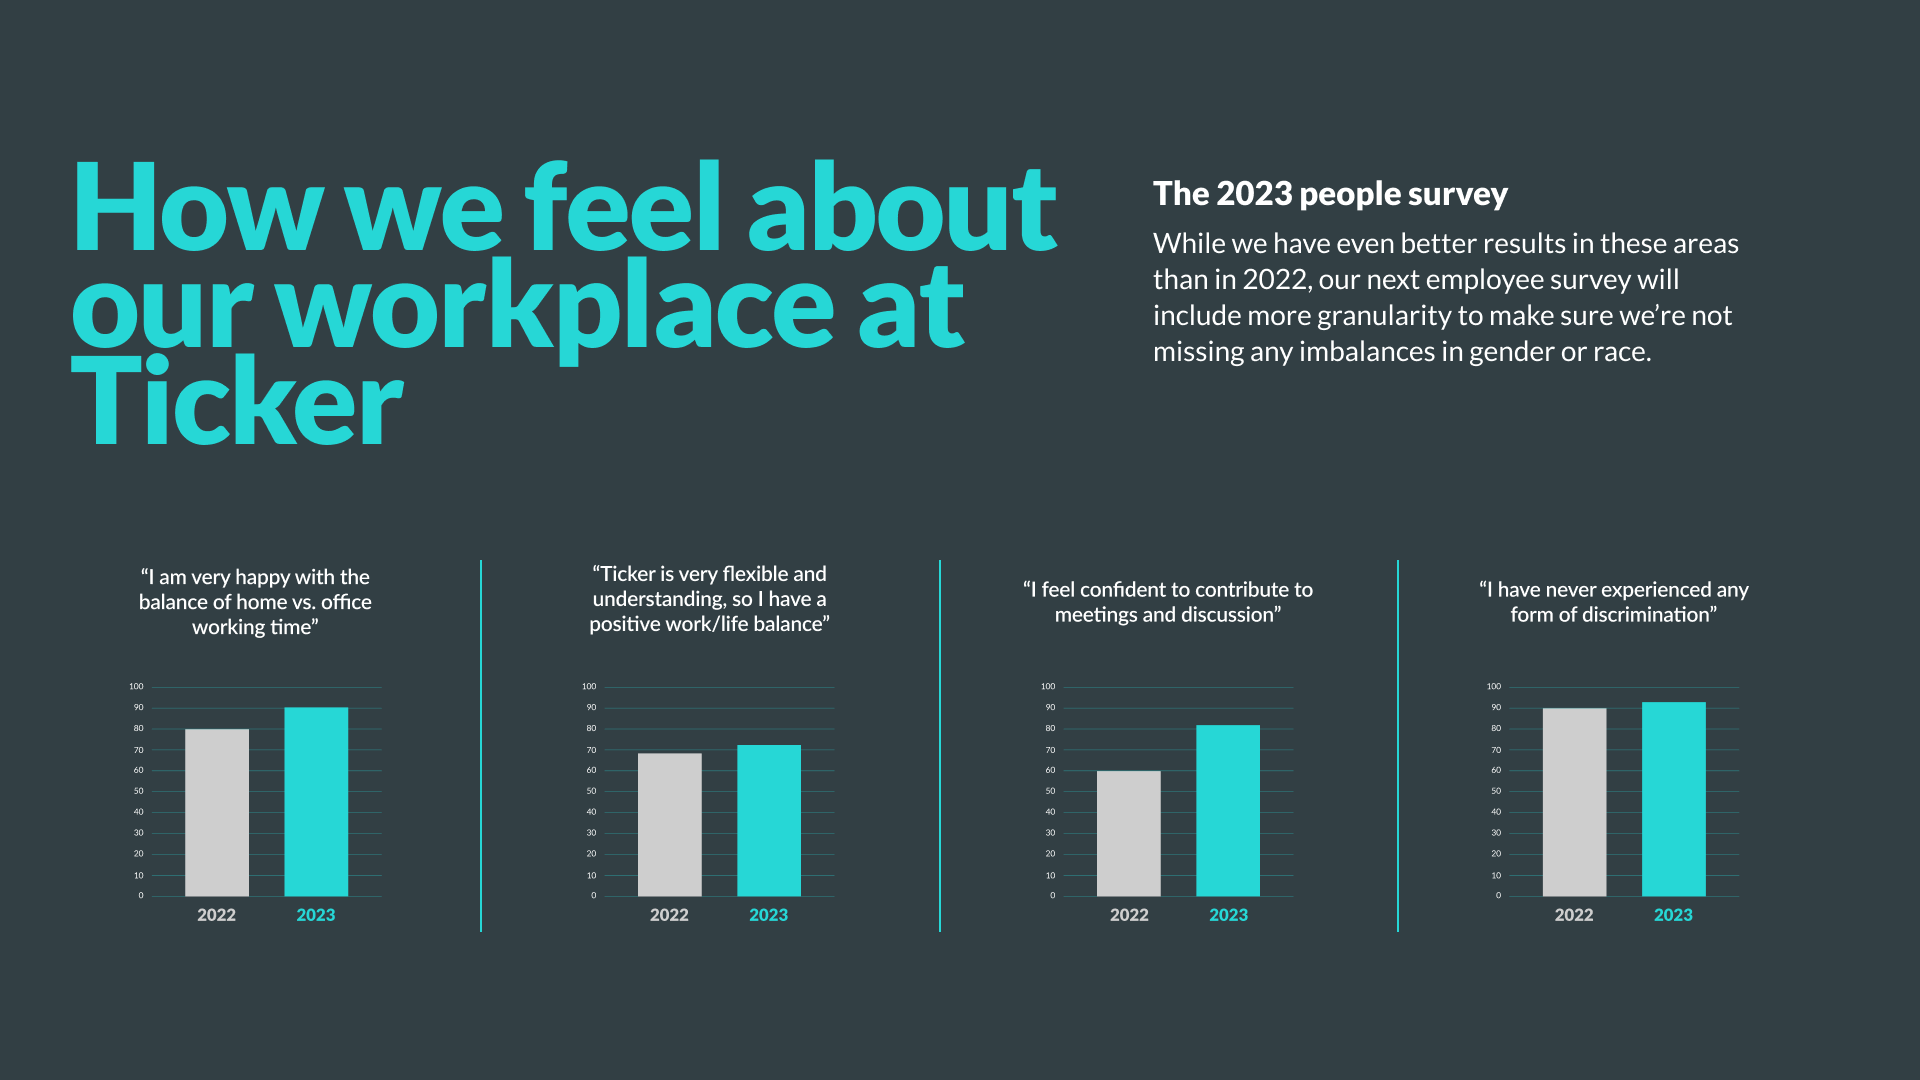 While we have even better results in these areas than in 2022, our next employee survey will include more granularity to make sure we’re not missing any imbalances in gender or race.